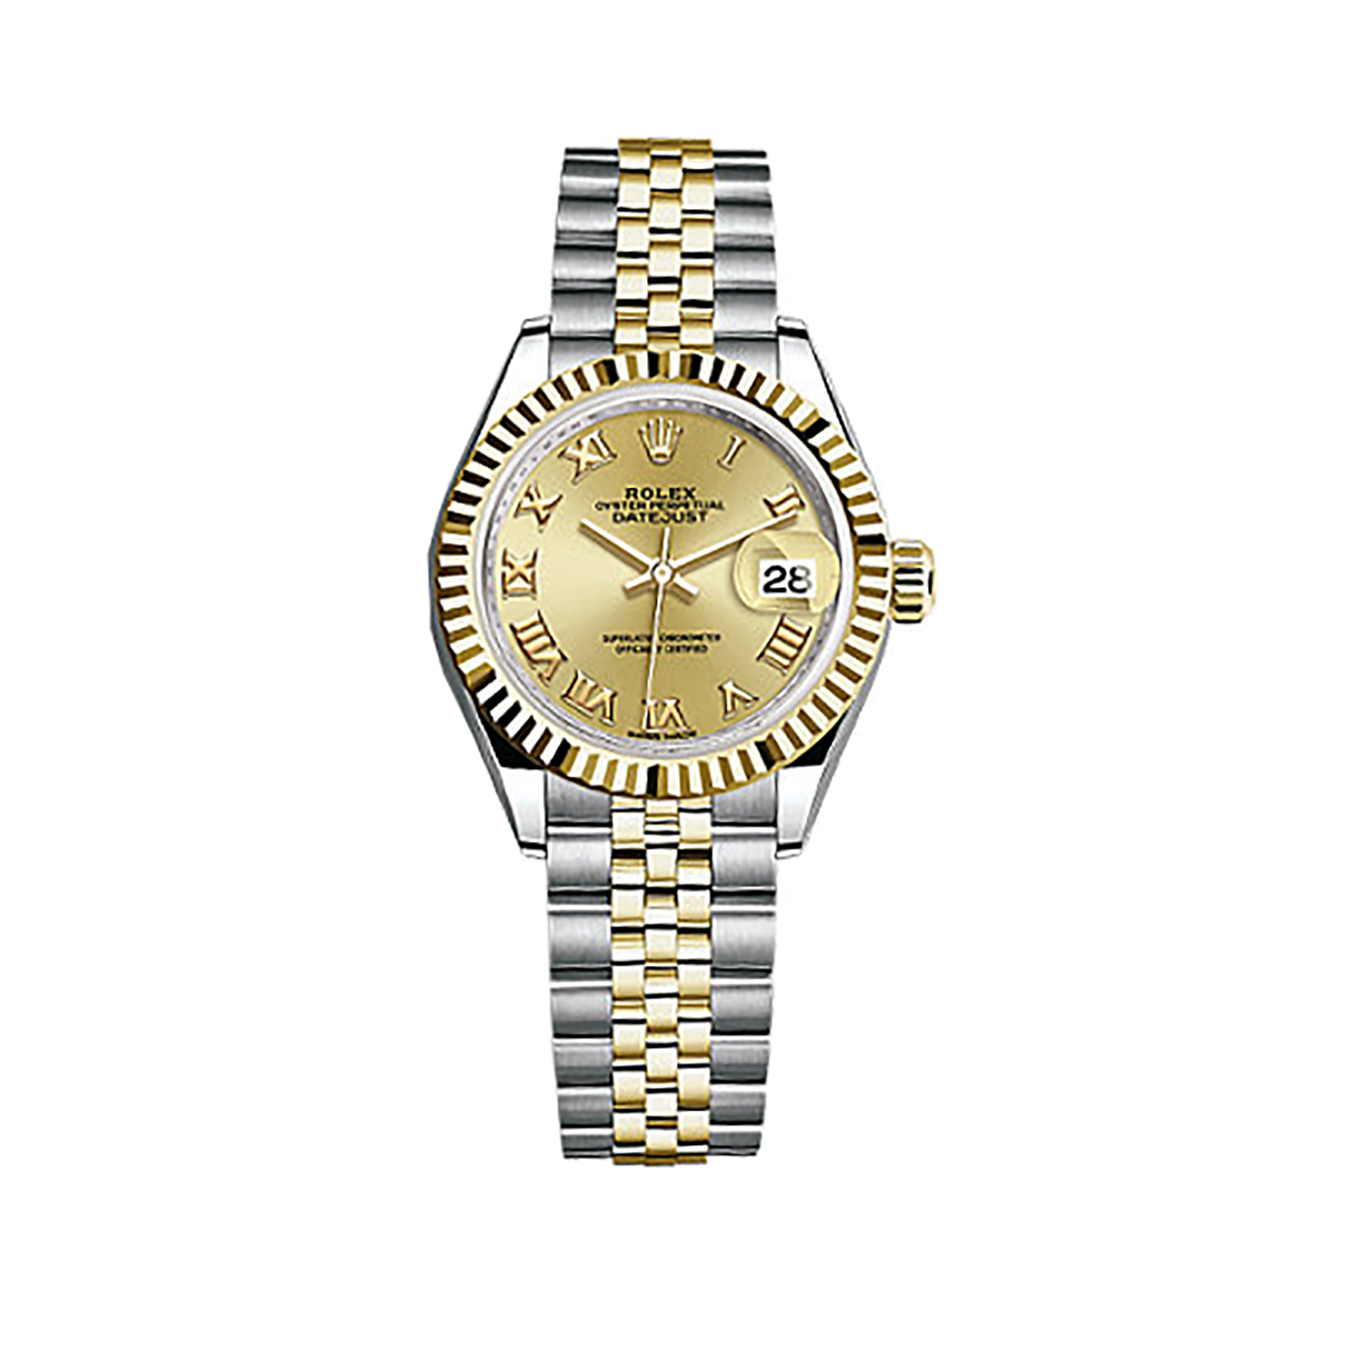 Lady-Datejust 28 279173 Gold & Stainless Steel Watch (Champagne)